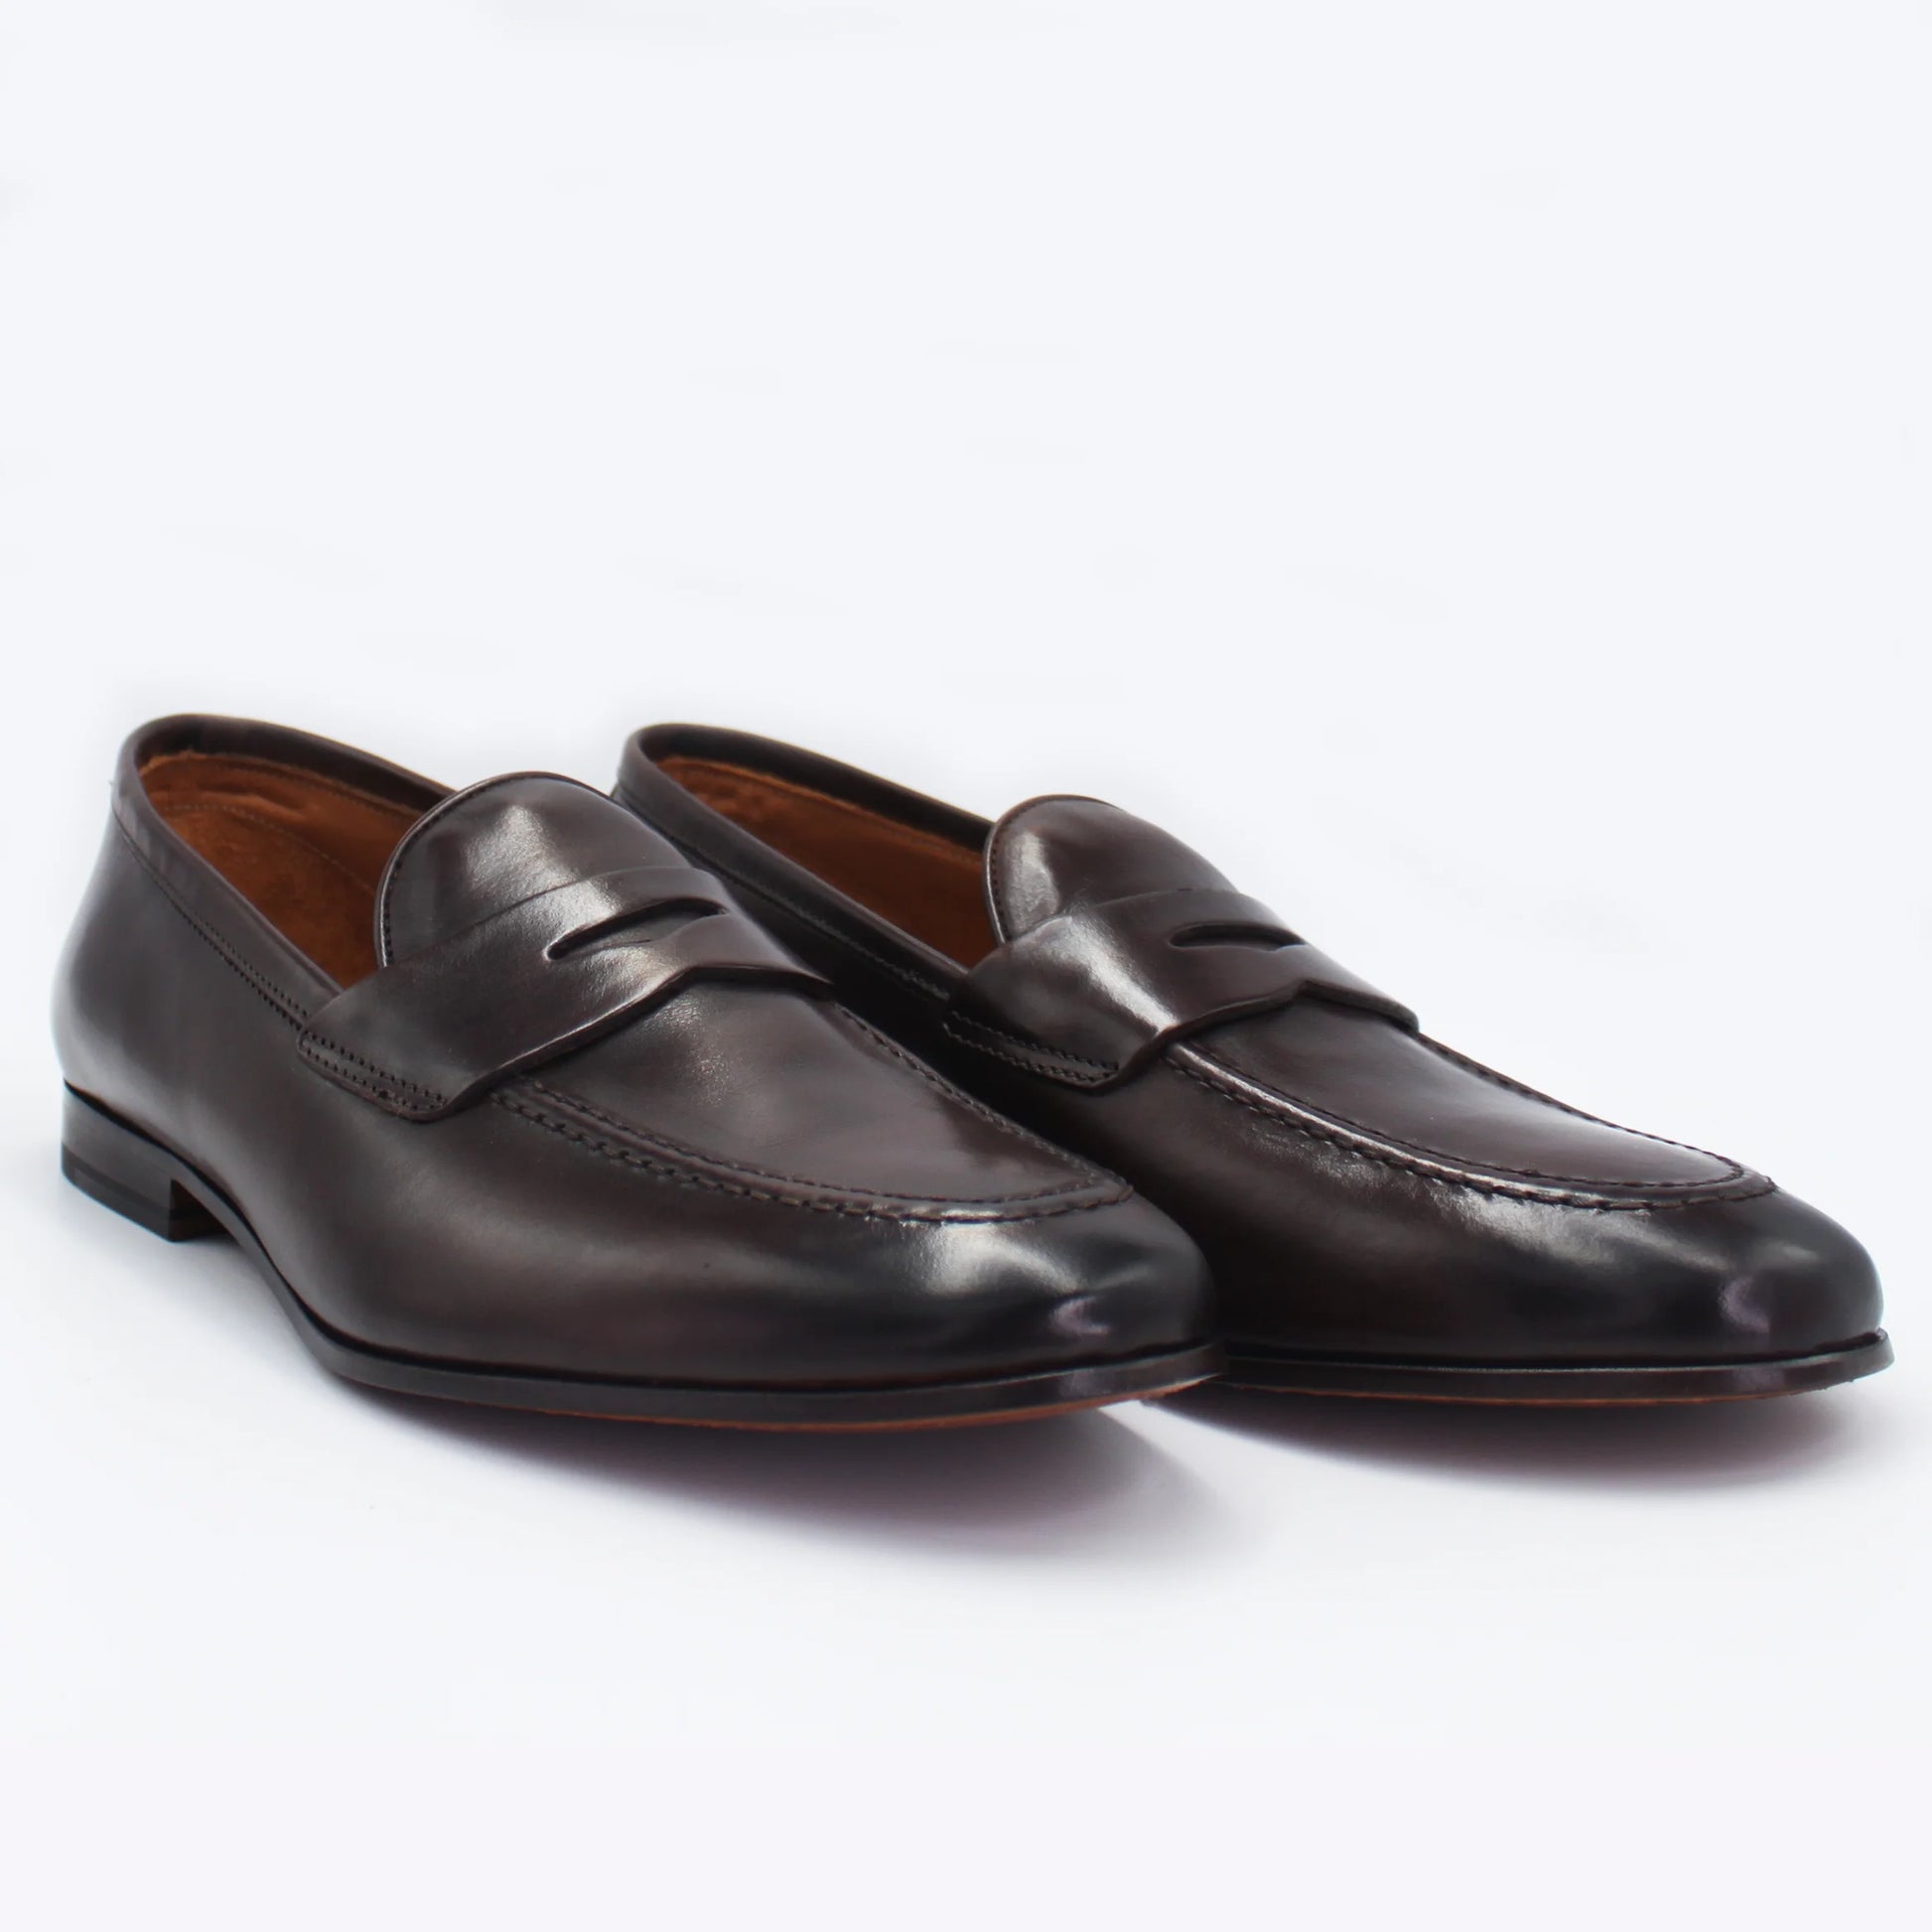 Shop Handmade Italian Leather Moccasin in Brown (AC282) or browse our range of hand-made Italian moccasins & loafers for men in leather or suede in-store at Aliverti Durban or Cape Town, or shop online. We deliver in South Africa & offer multiple payment plans as well as accept multiple safe & secure payment methods.